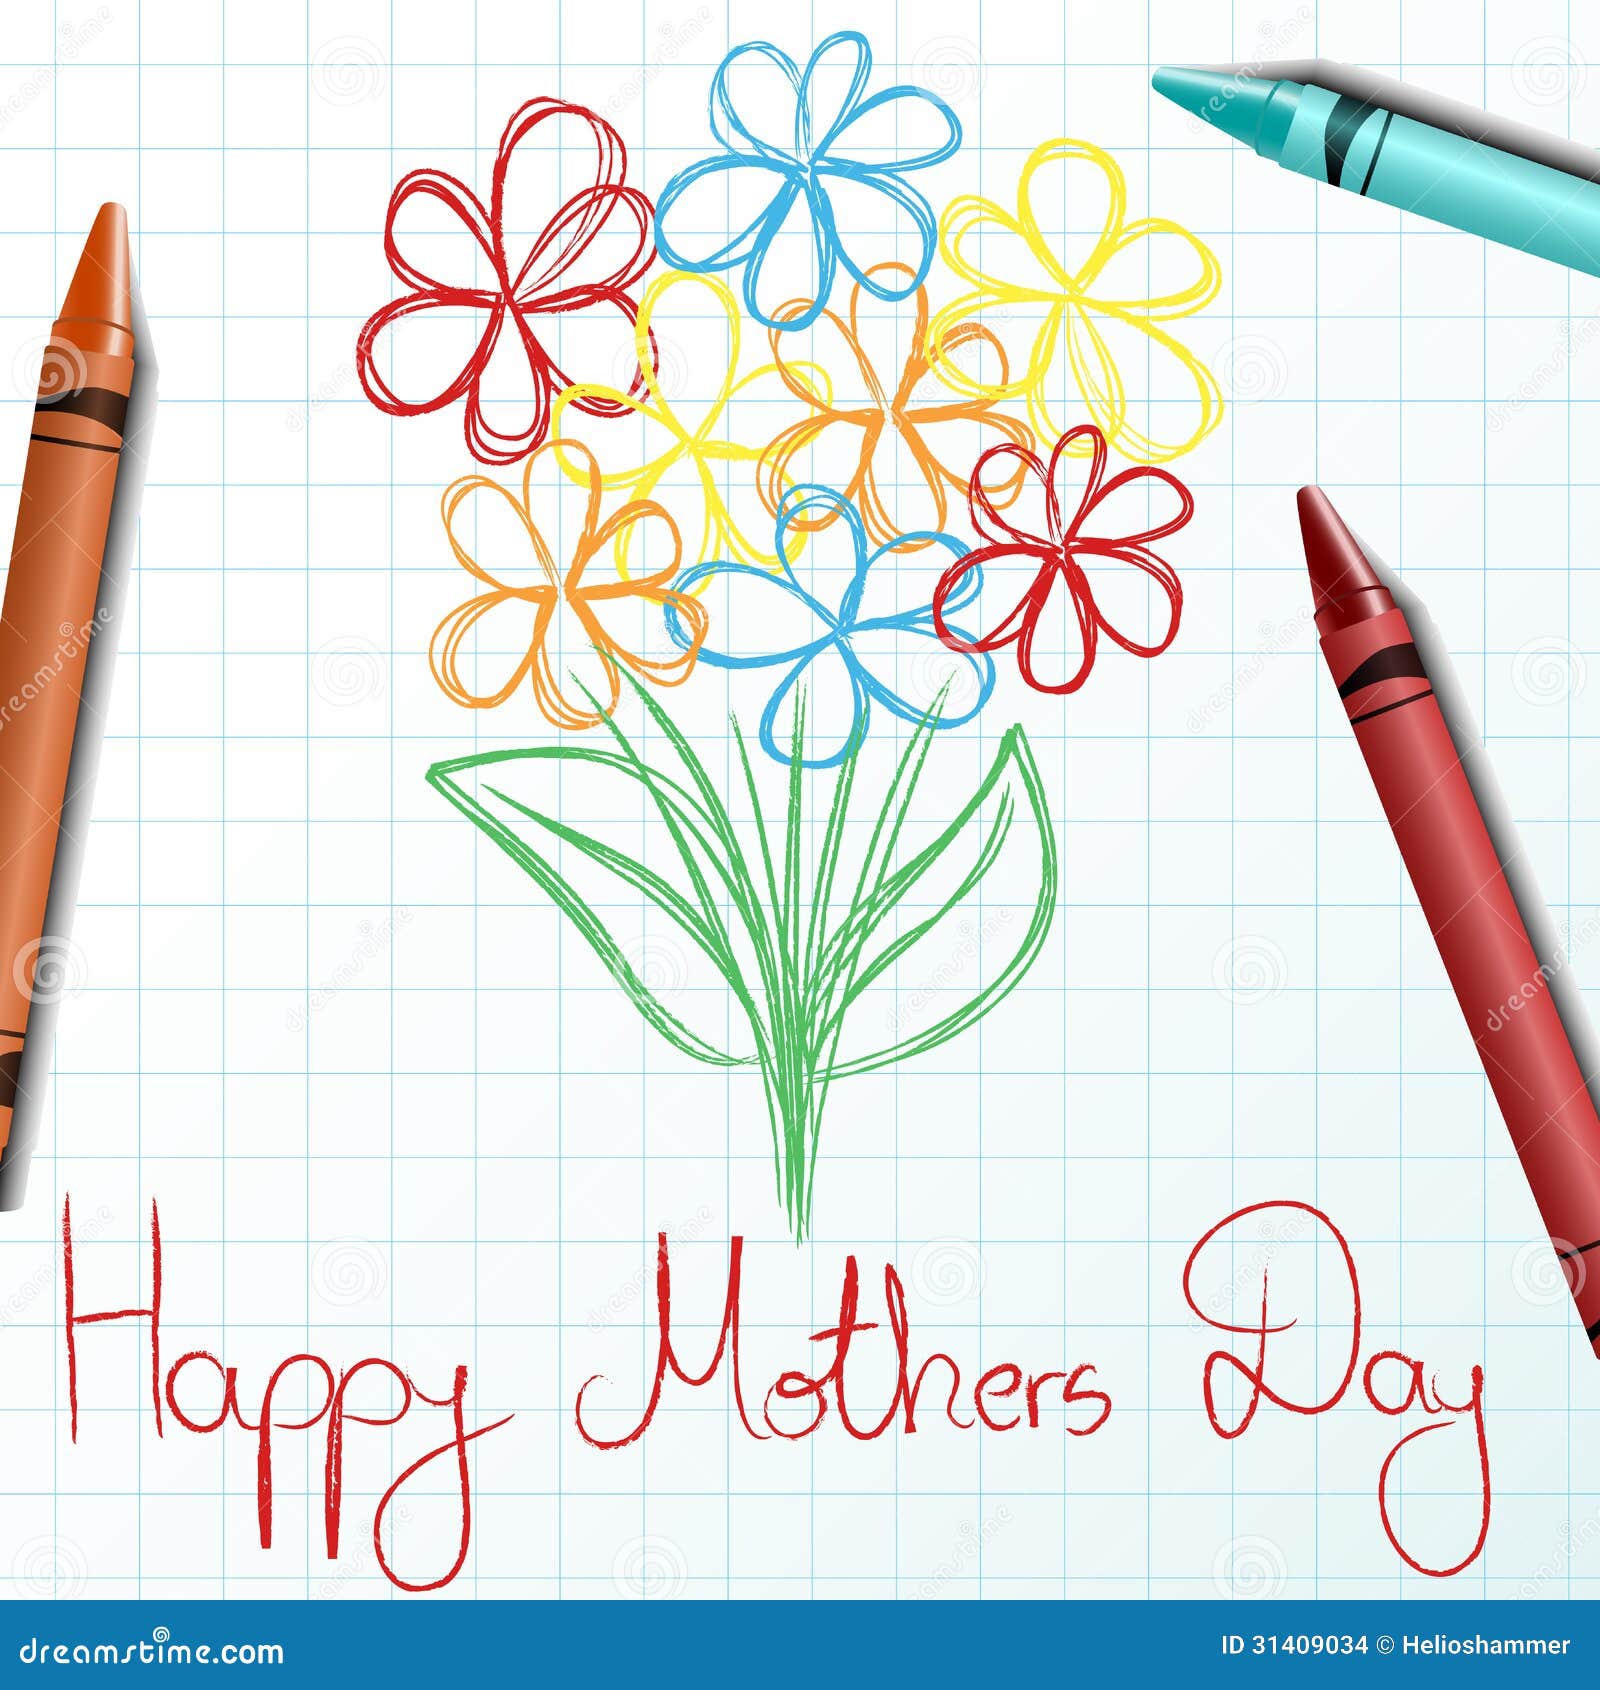 Beautiful Mother's Day Drawing in EPS, Illustrator, JPG, PSD, PNG, PDF, SVG  - Download | Template.net